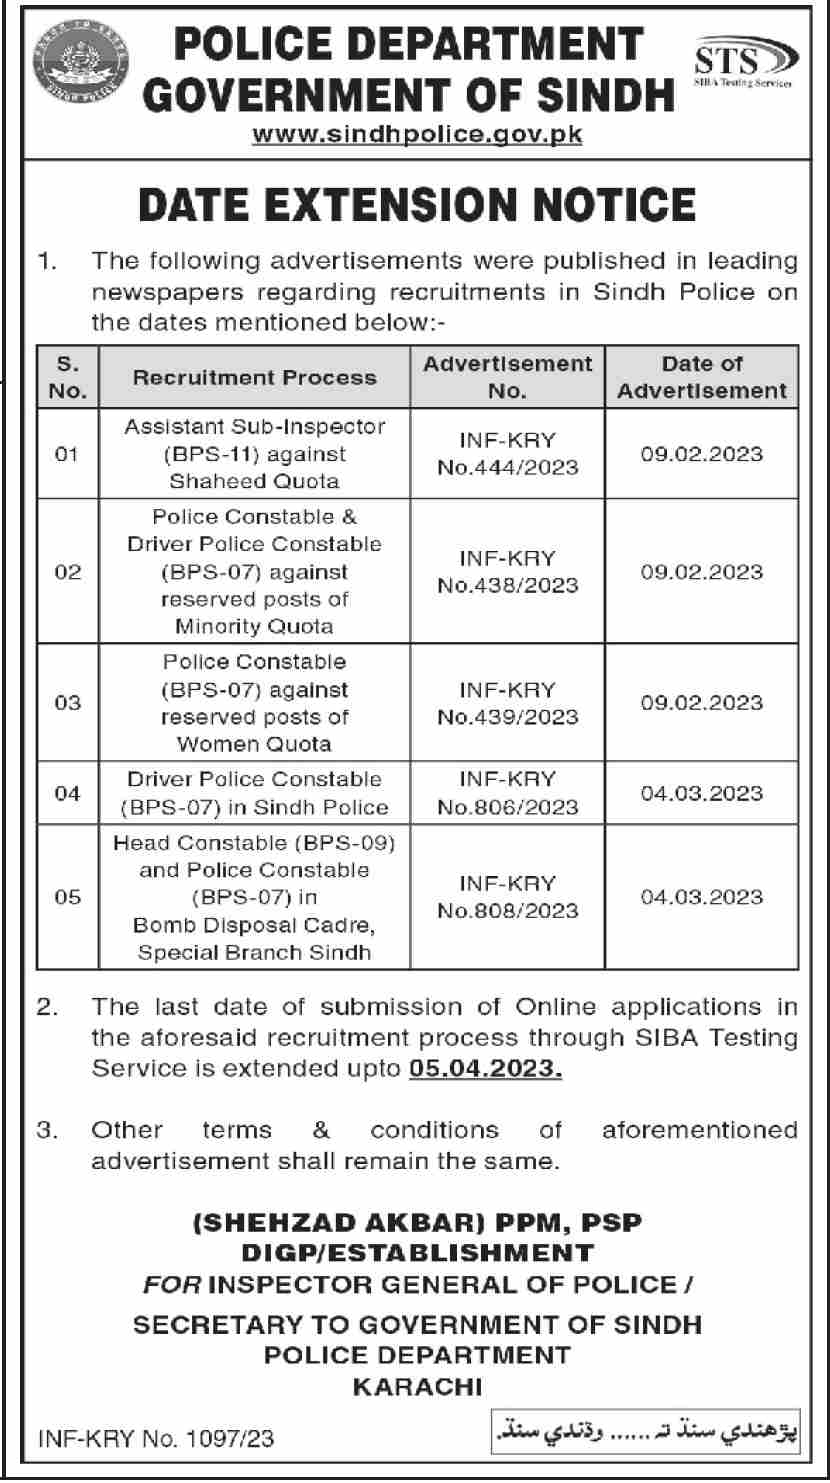 Police Department Sindh Jobs in 2023